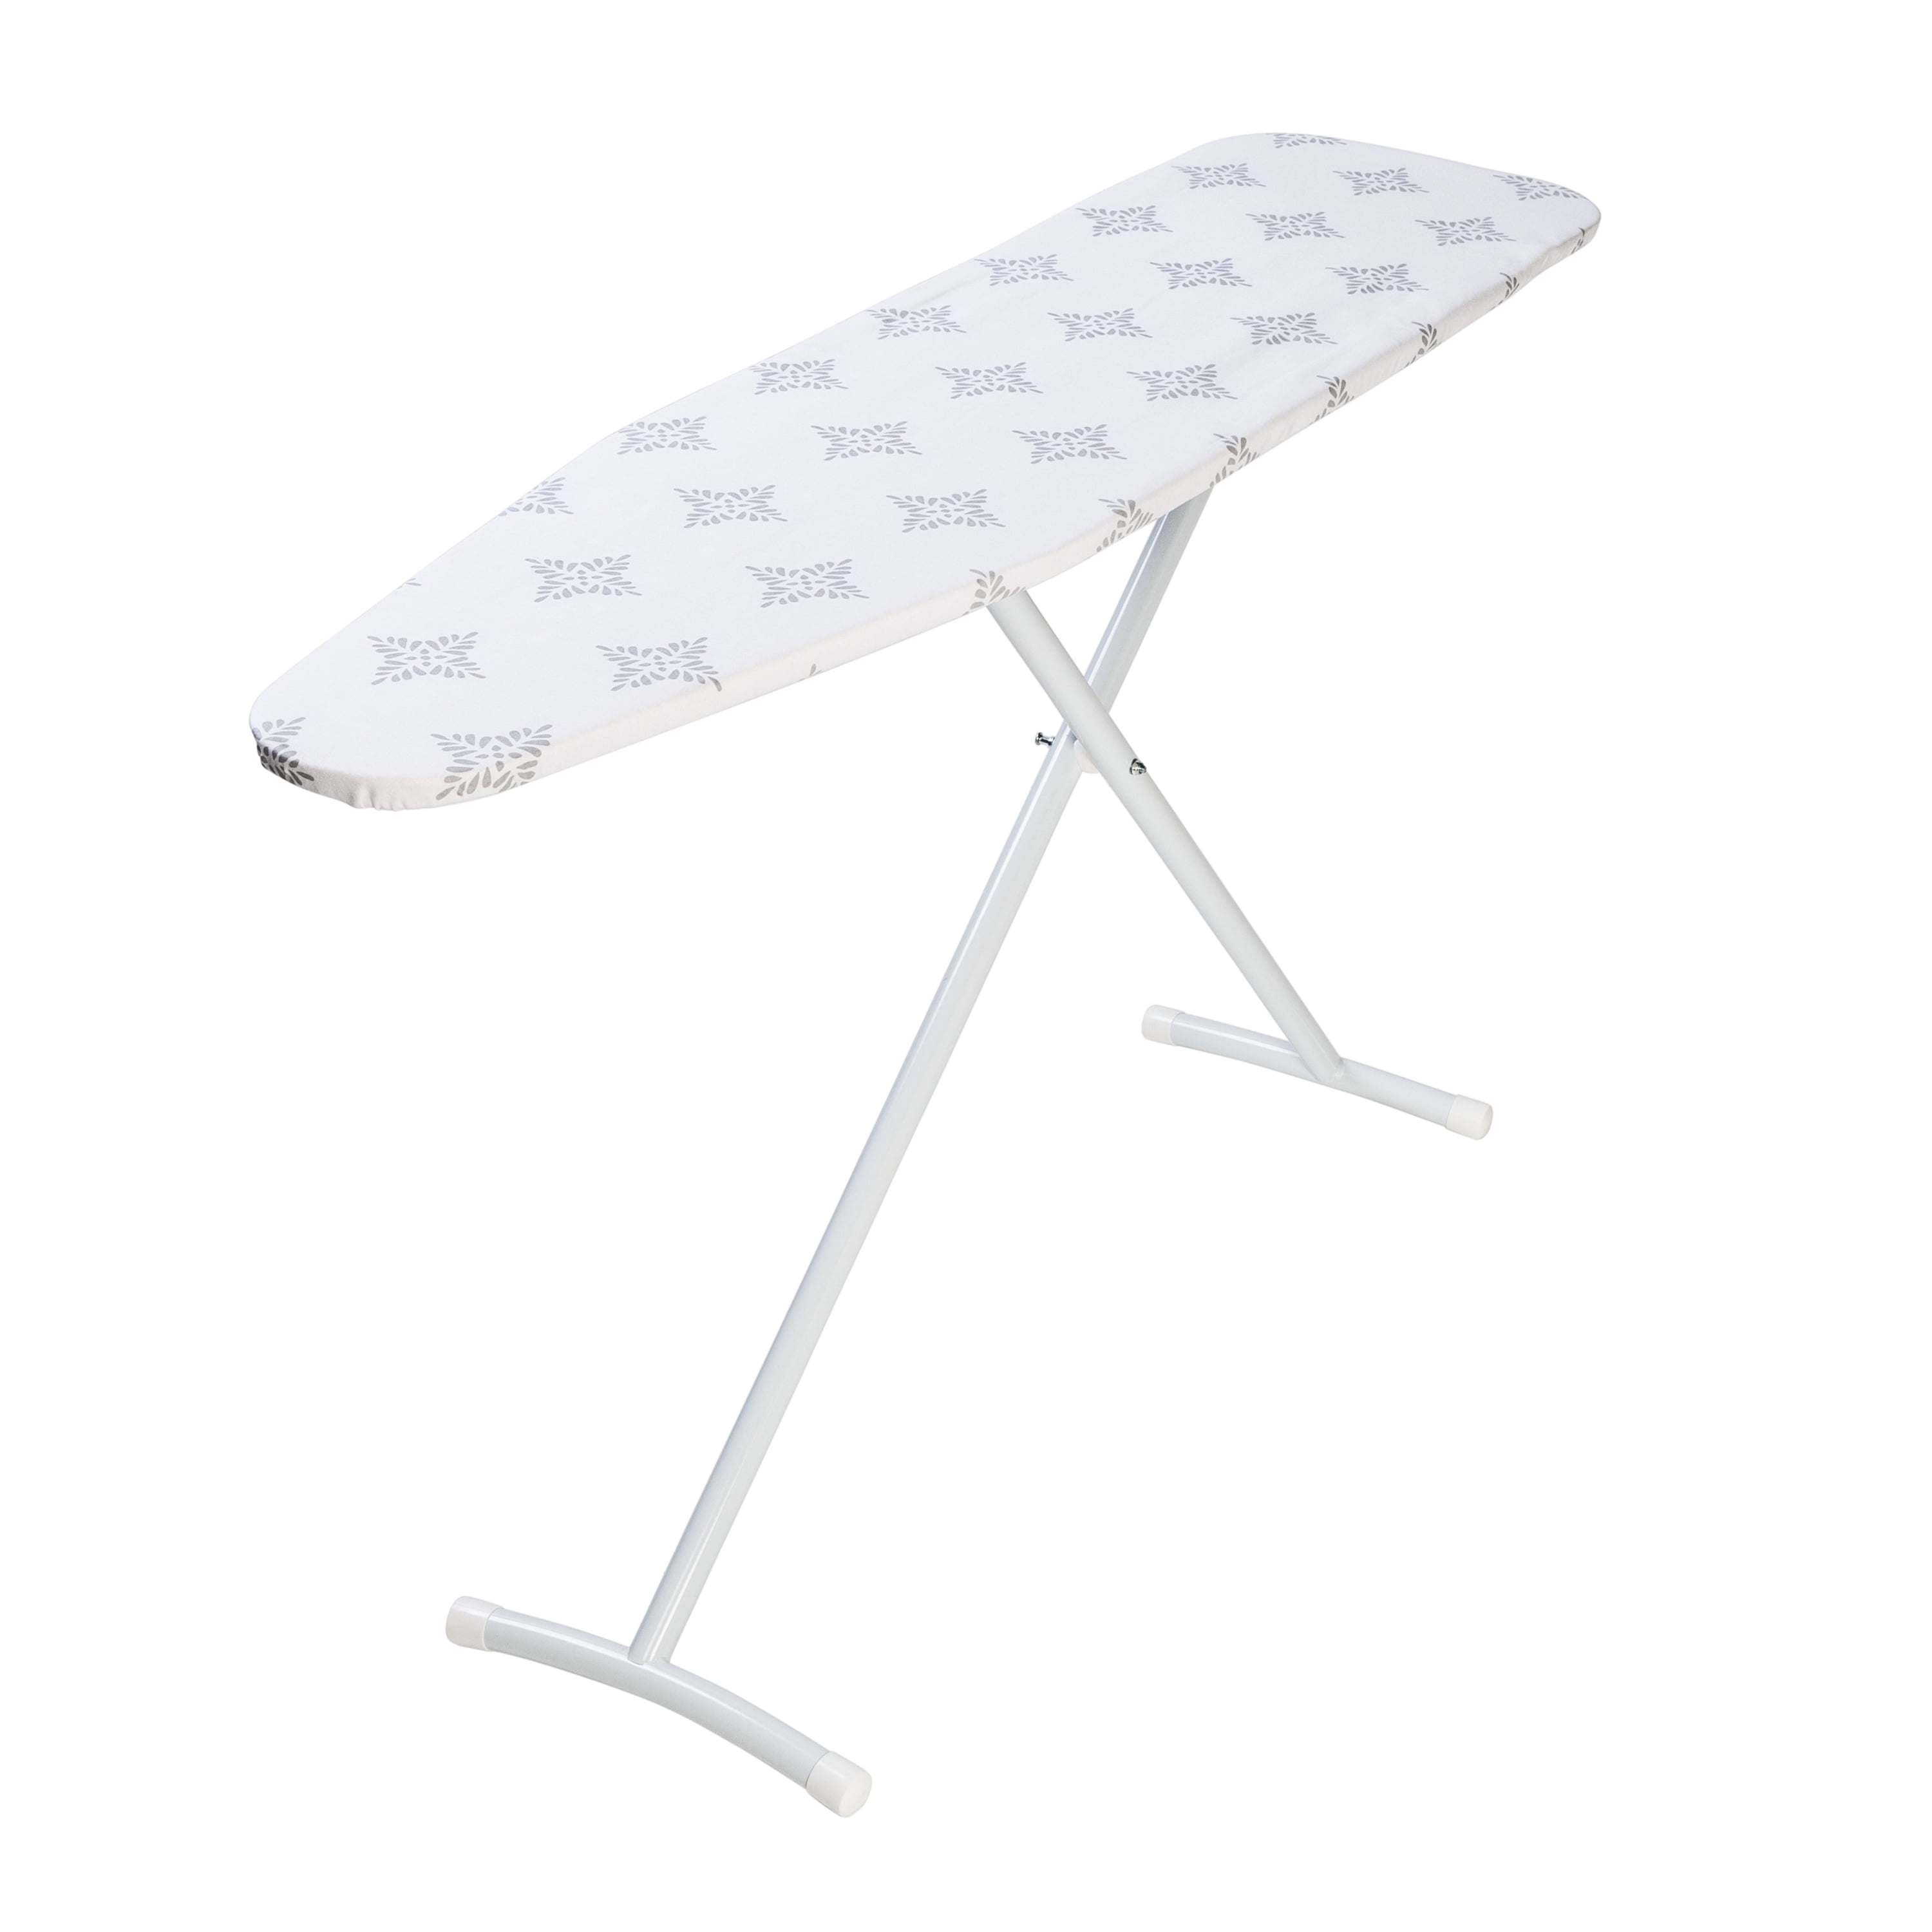 Mainstays T-Leg Adjustable Height Ironing Board, Cream and Grey Cover